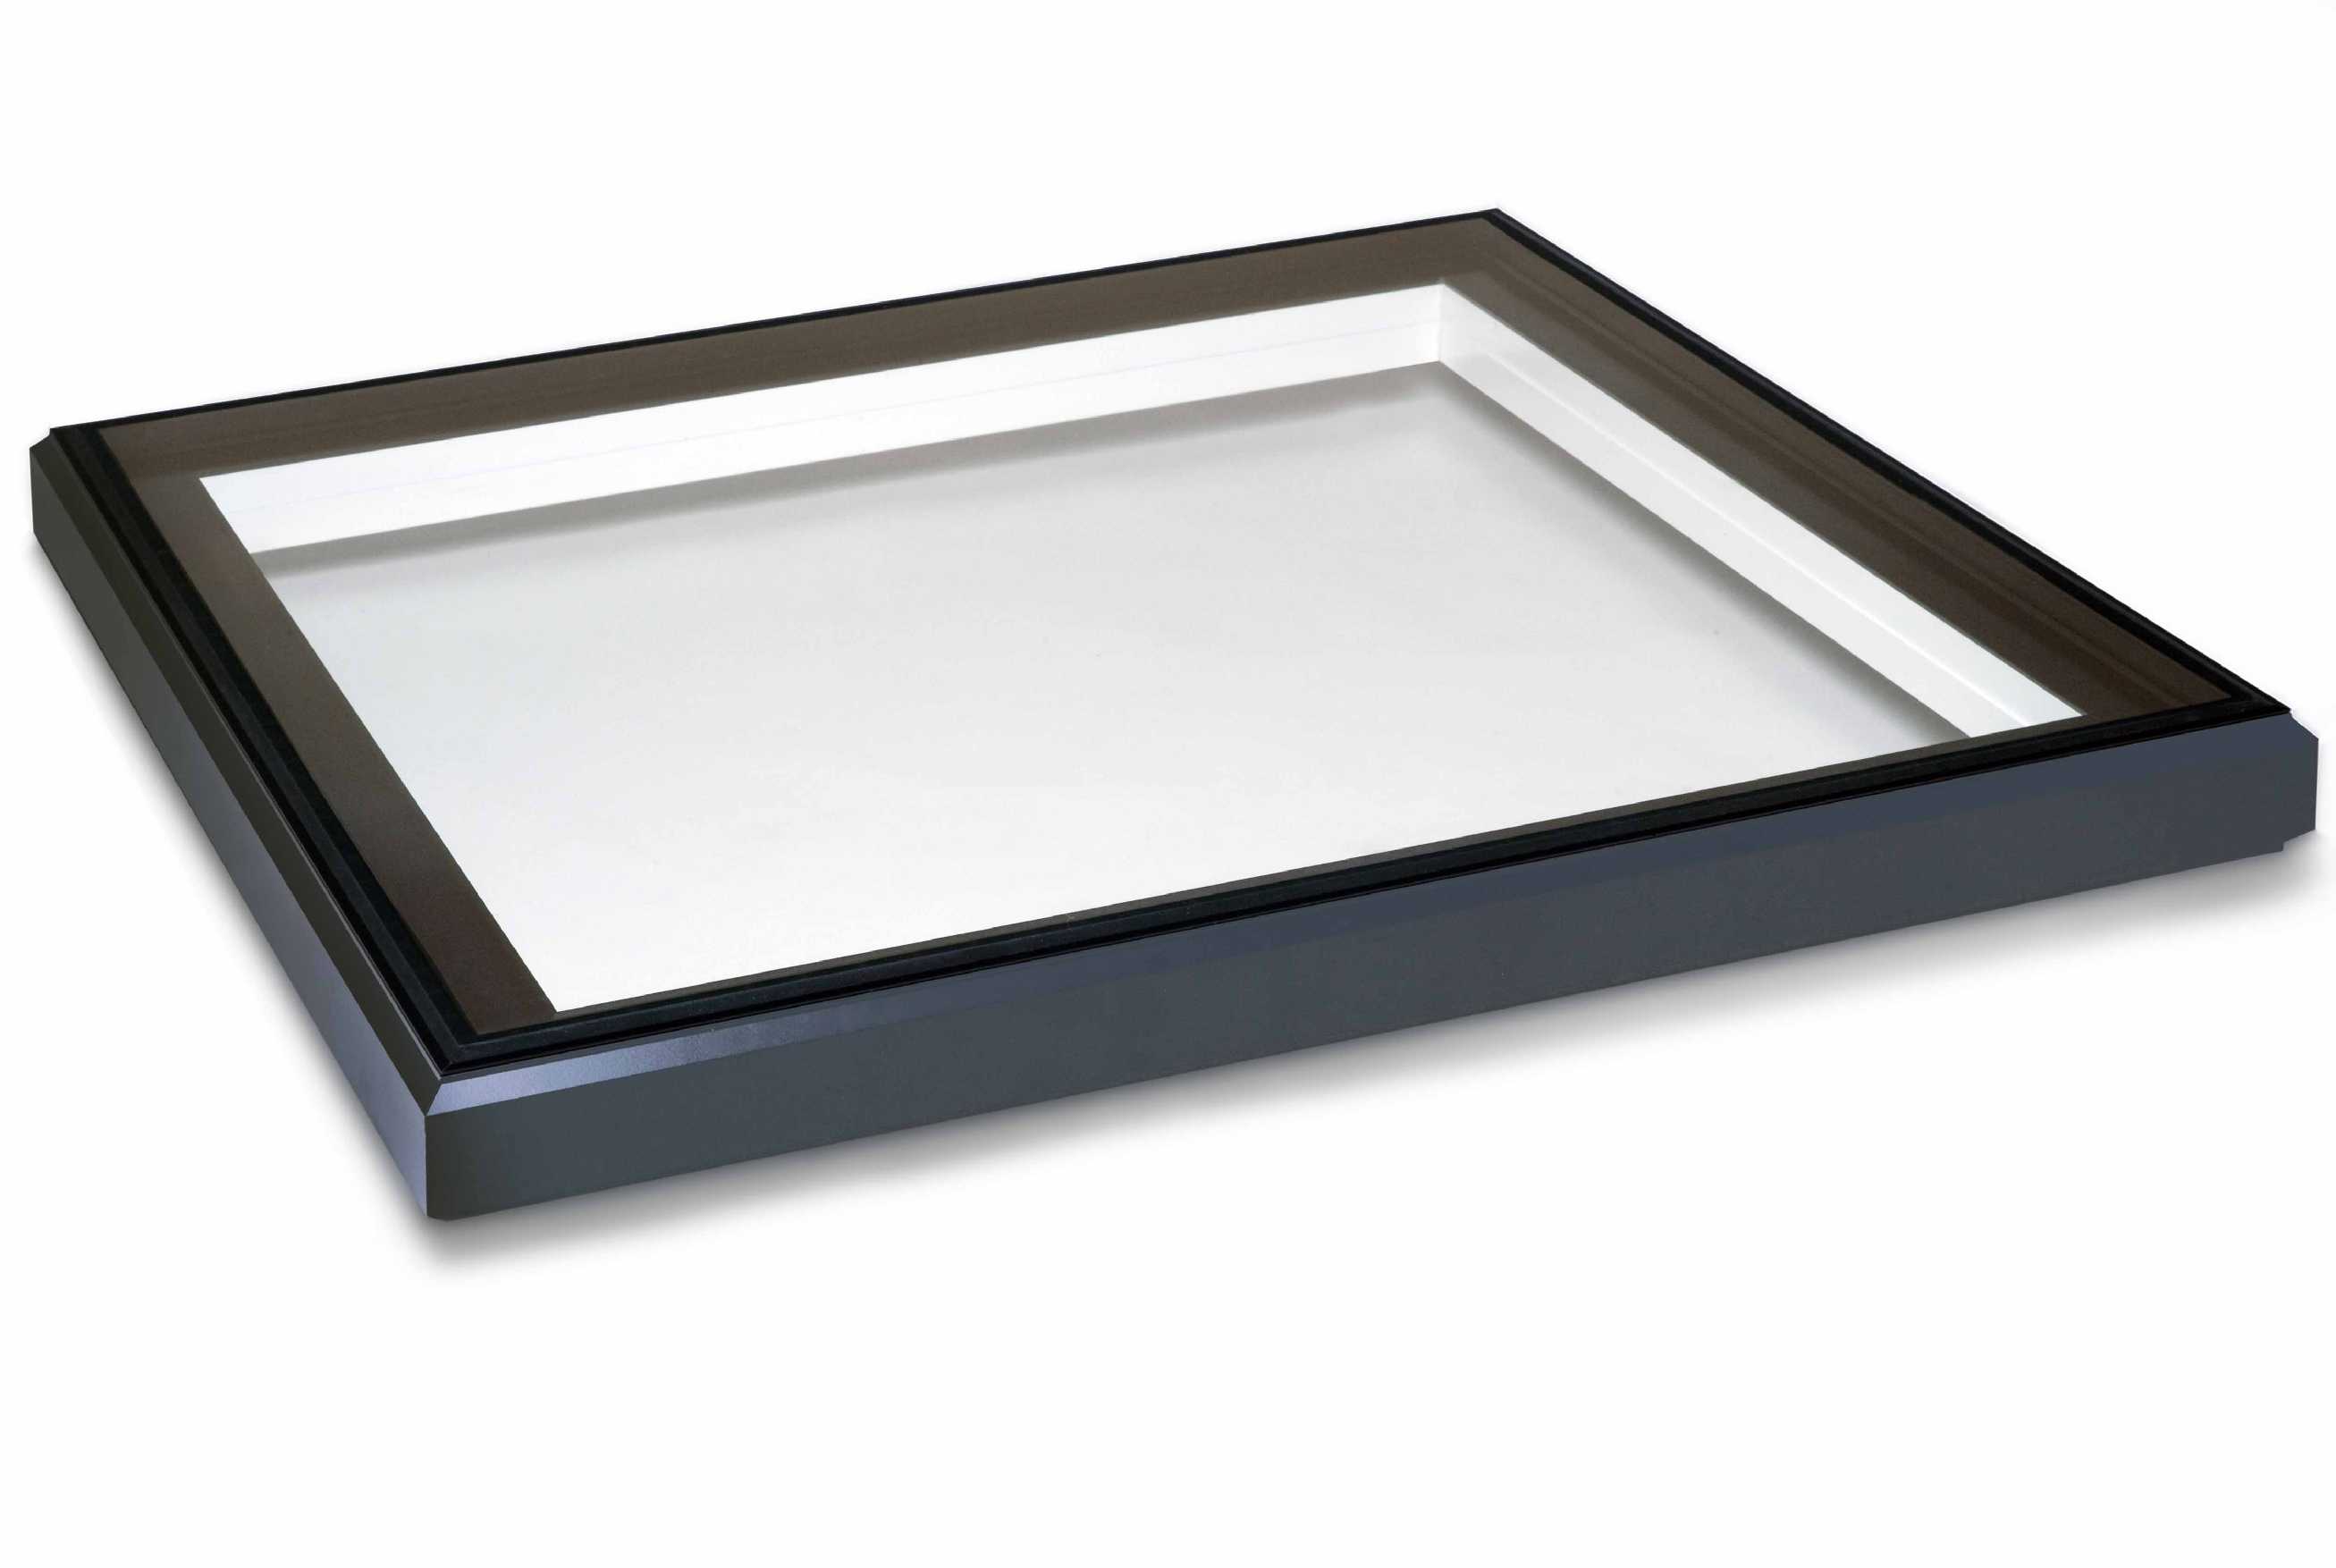 Buy EcoGard Flat Roof light, Double Glazed, Fixed, 1,000mm x 1,000mm online today